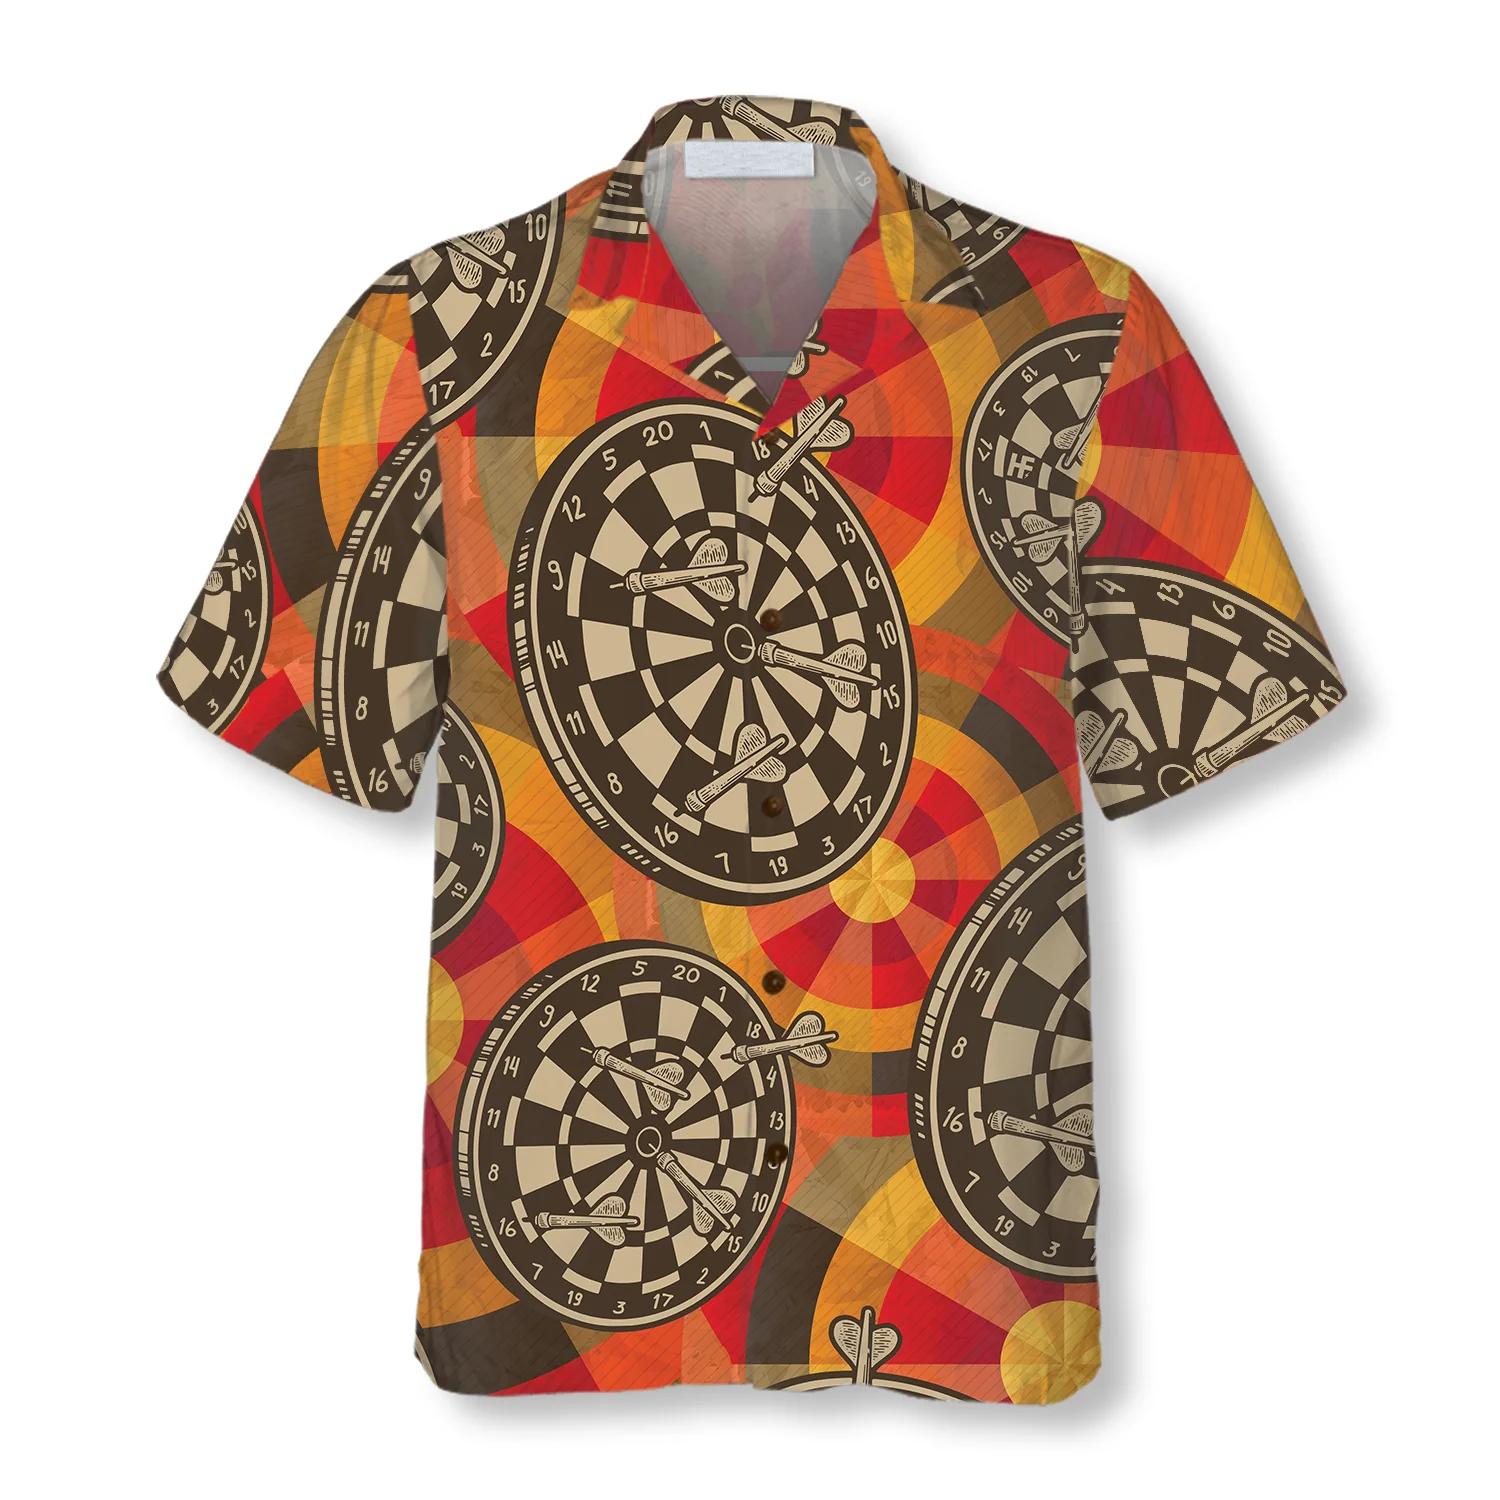 Happiness Is a Tight Threesome Darts Hawaiian Shirt/ Colorful Summer Aloha Shirt For Men Women/ Gift For Friend/ Team/ Darts Lovers